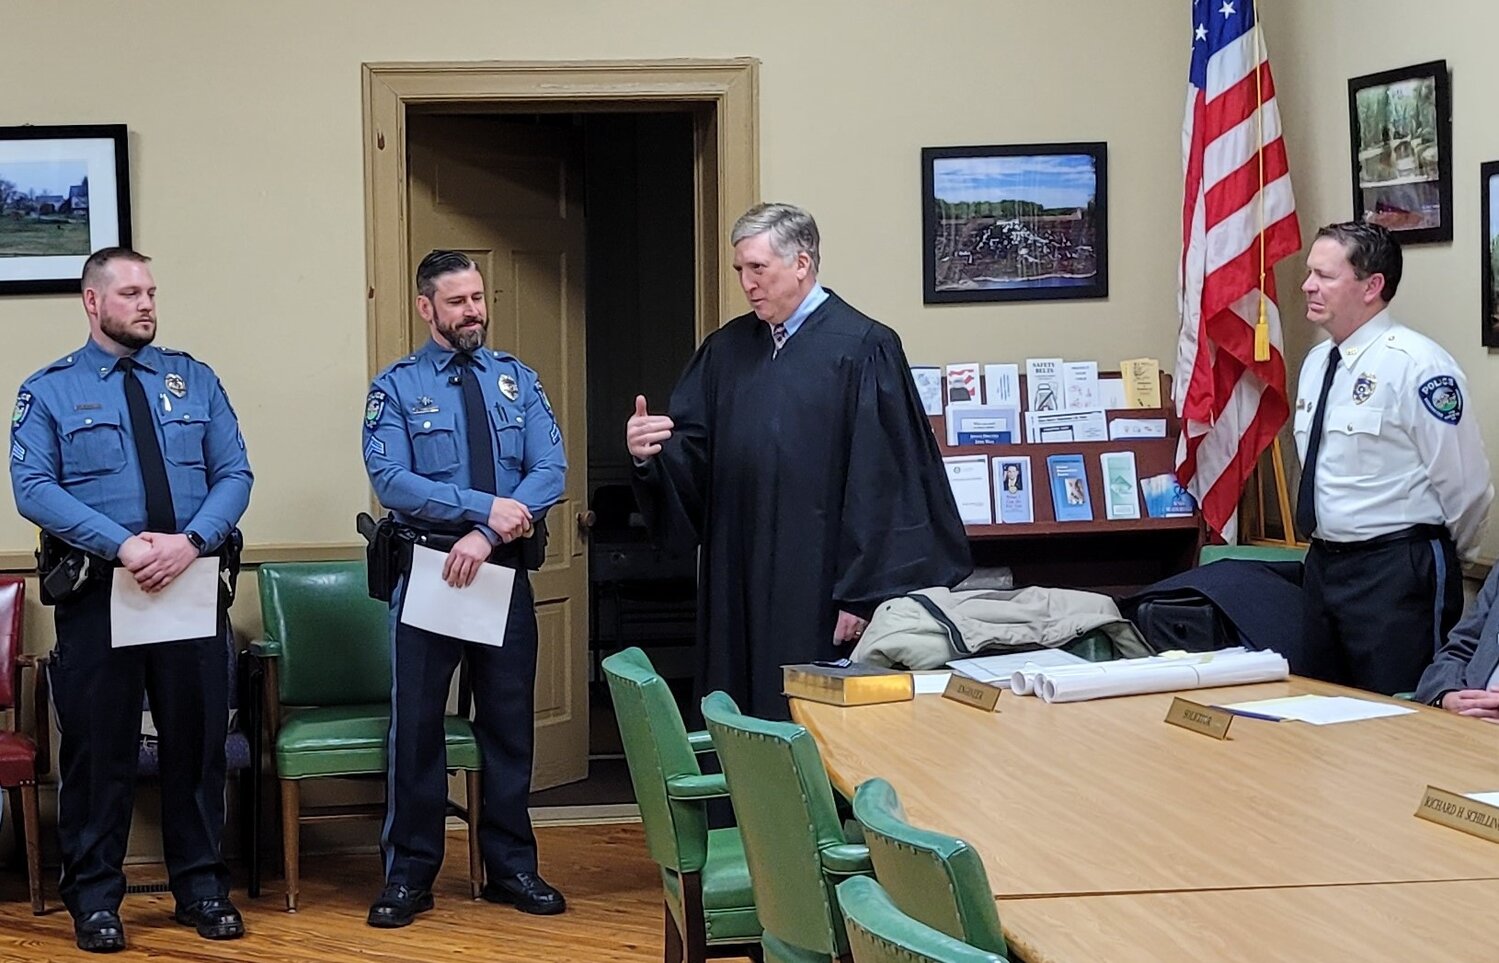 At the Jan. 10 Bedminster Township board of supervisors meeting, District Judge Gary Gambardella took the occasion of his promoting police officers Mark Thompson and Nicholas Virnelson to praise the department’s officers, chief, and staff for growing it from “good” to “great.”